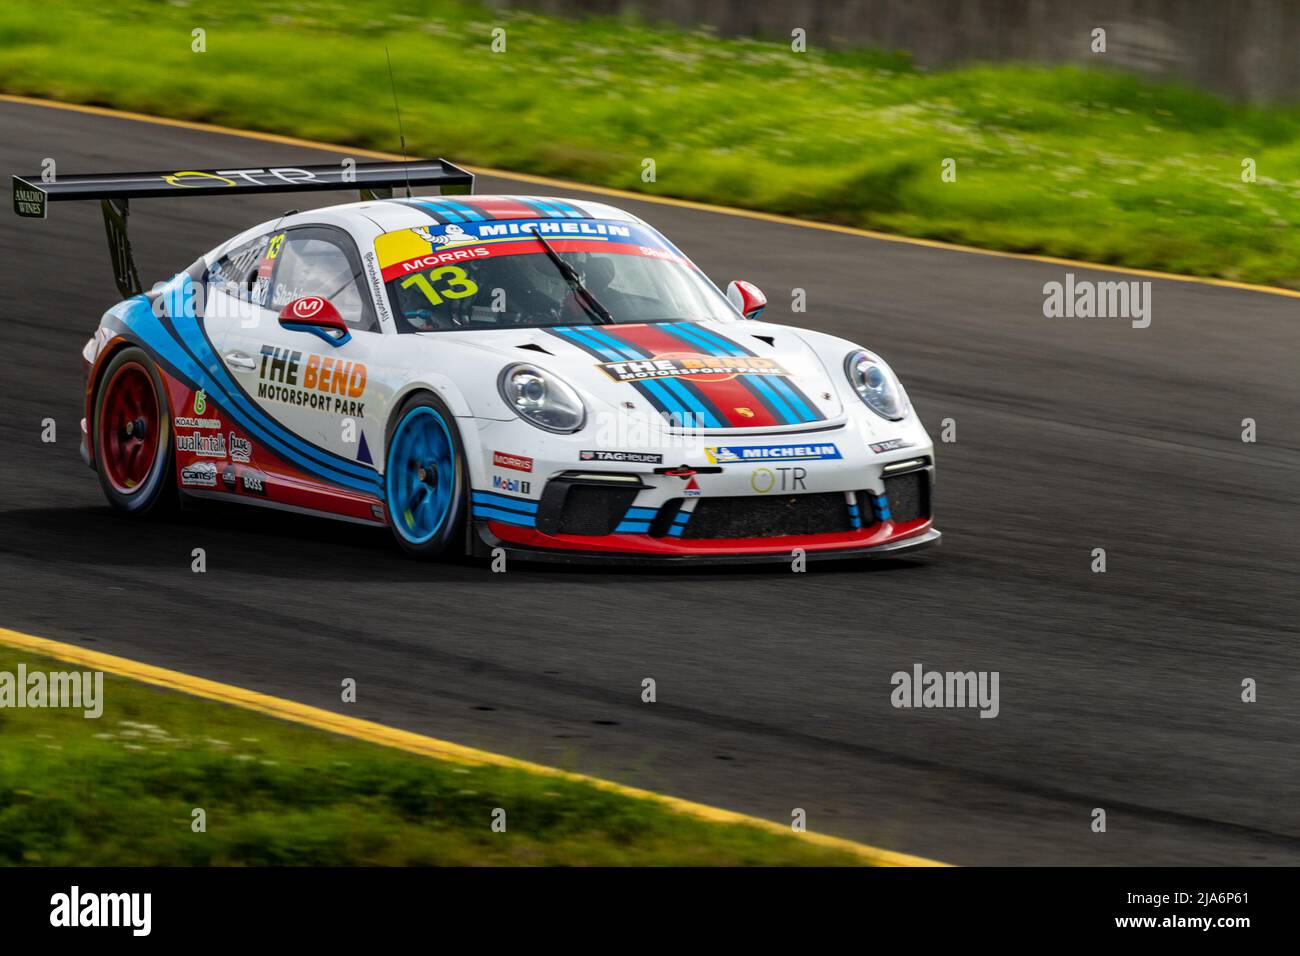 Sydney, Australia. 27 May, 2022. Sam Shahin piloting his Porsche Carrera Cup car down towards turn 2 at Sydney Motorsport Park during race 2 of the Porsche Michelin Sprint Challenge. Credit: James Forrester / Alamy Live News. Stock Photo